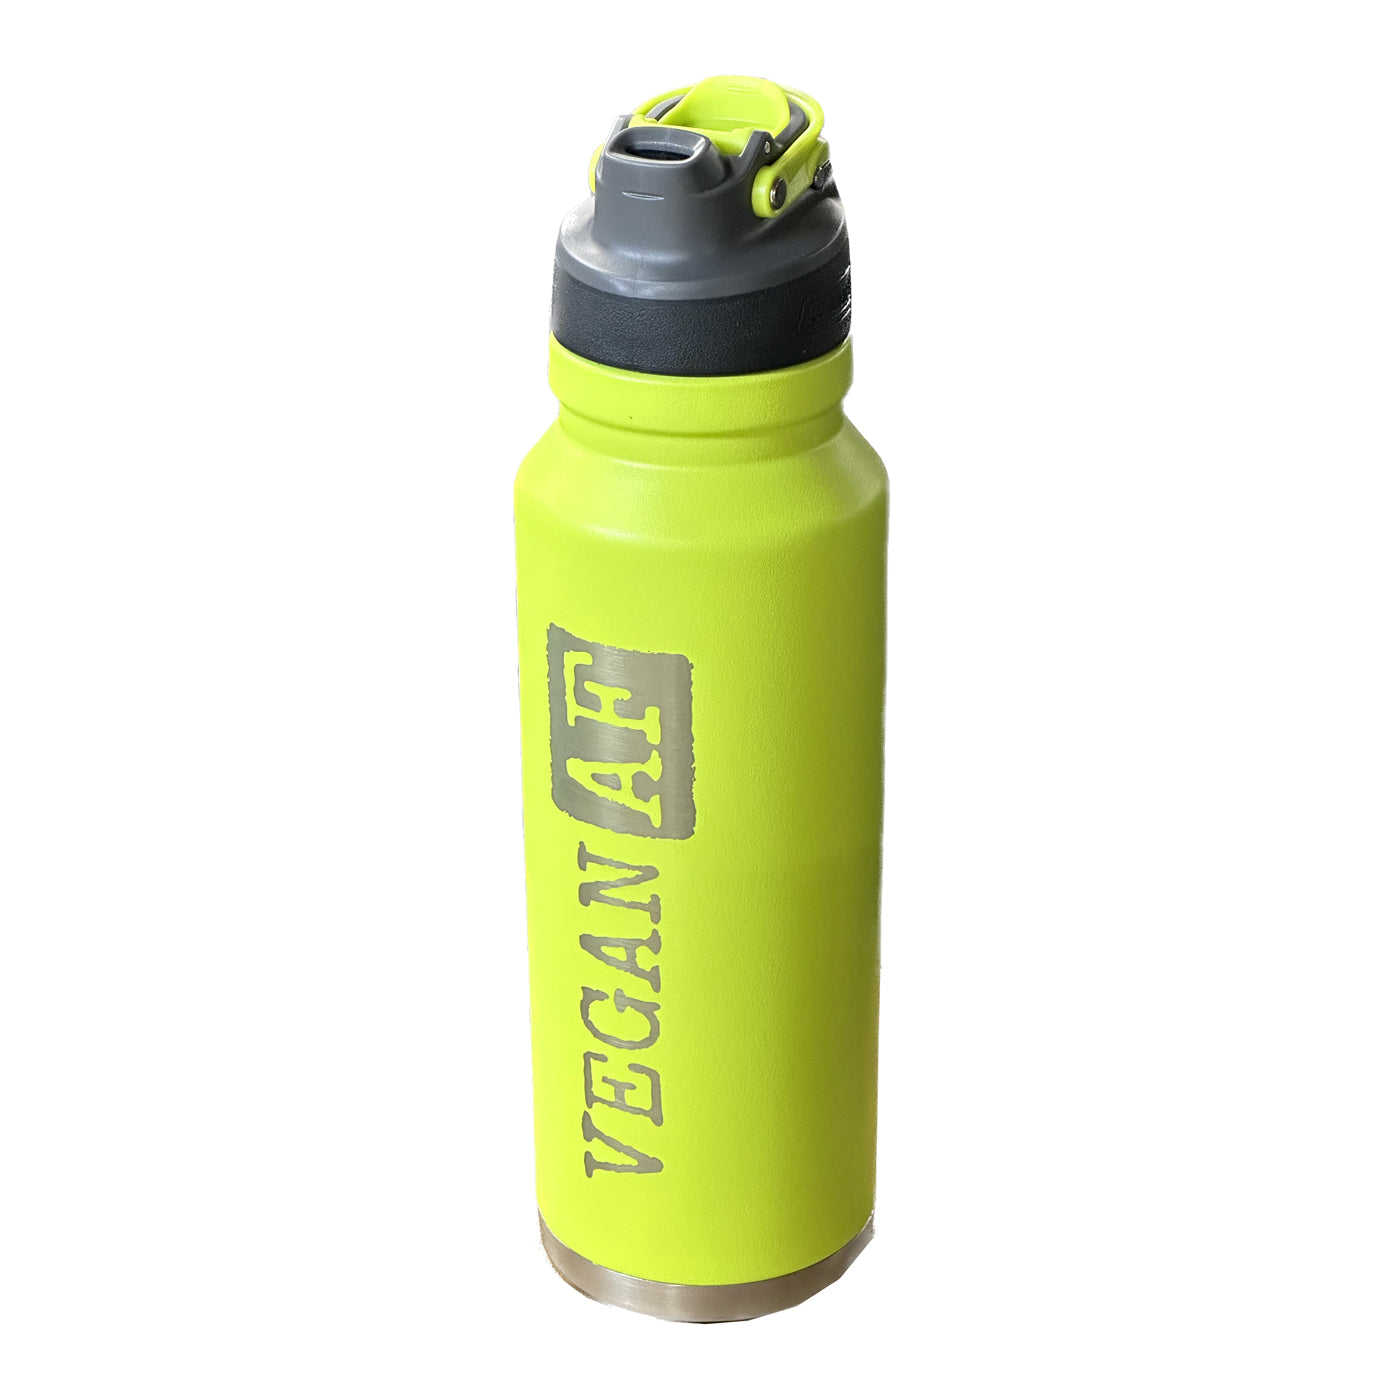  Neon Green Insulated Water Bottle with Straw Lid